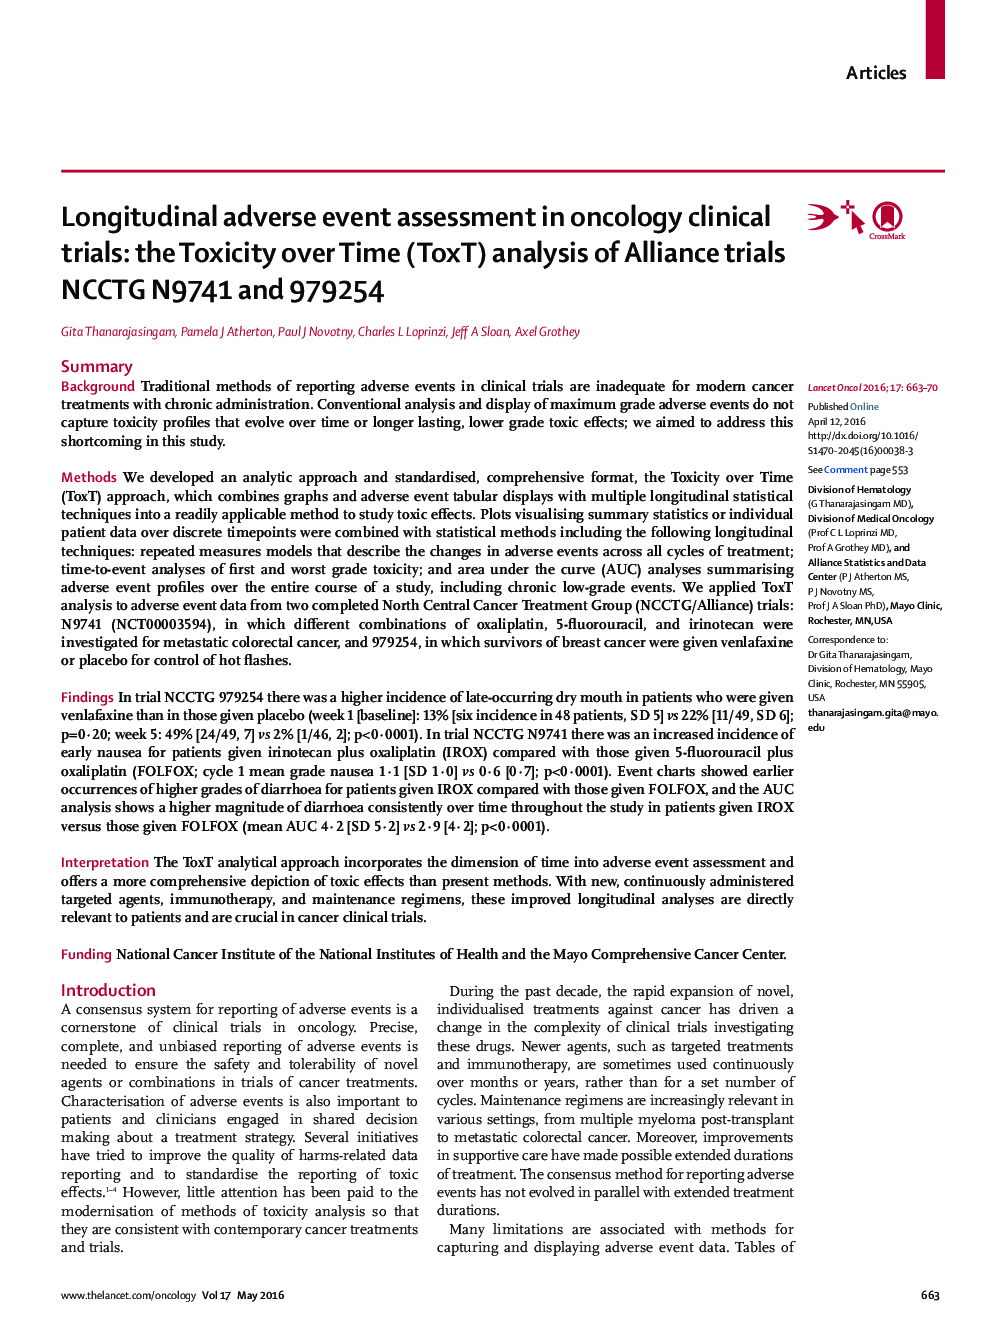 Longitudinal adverse event assessment in oncology clinical trials: the Toxicity over Time (ToxT) analysis of Alliance trials NCCTG N9741 and 979254